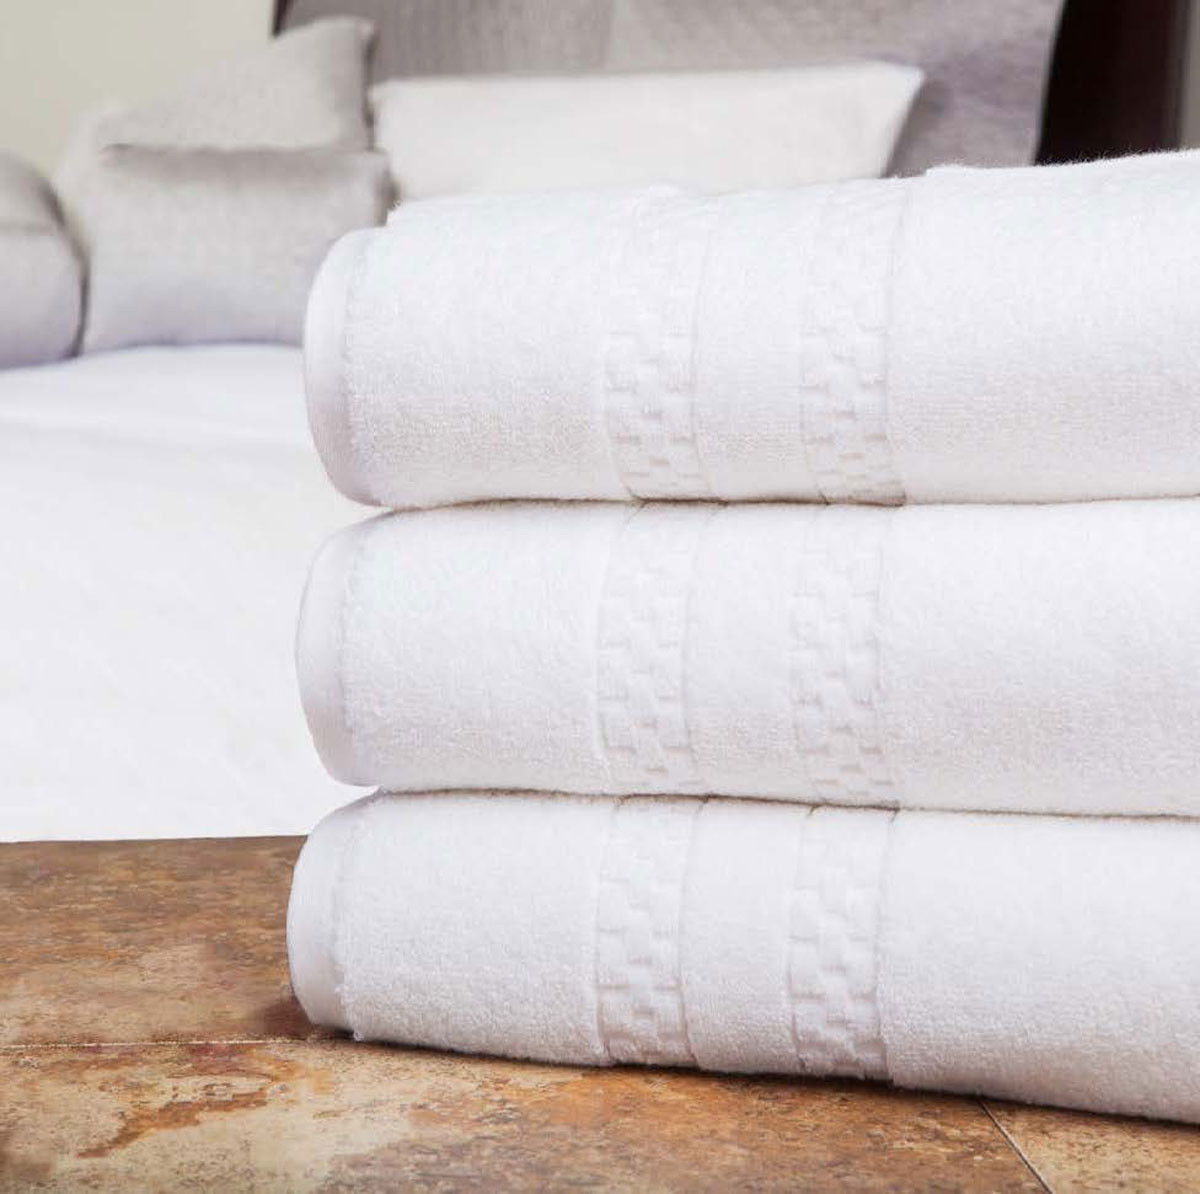 What fabric is used for the villa di lusso towels?